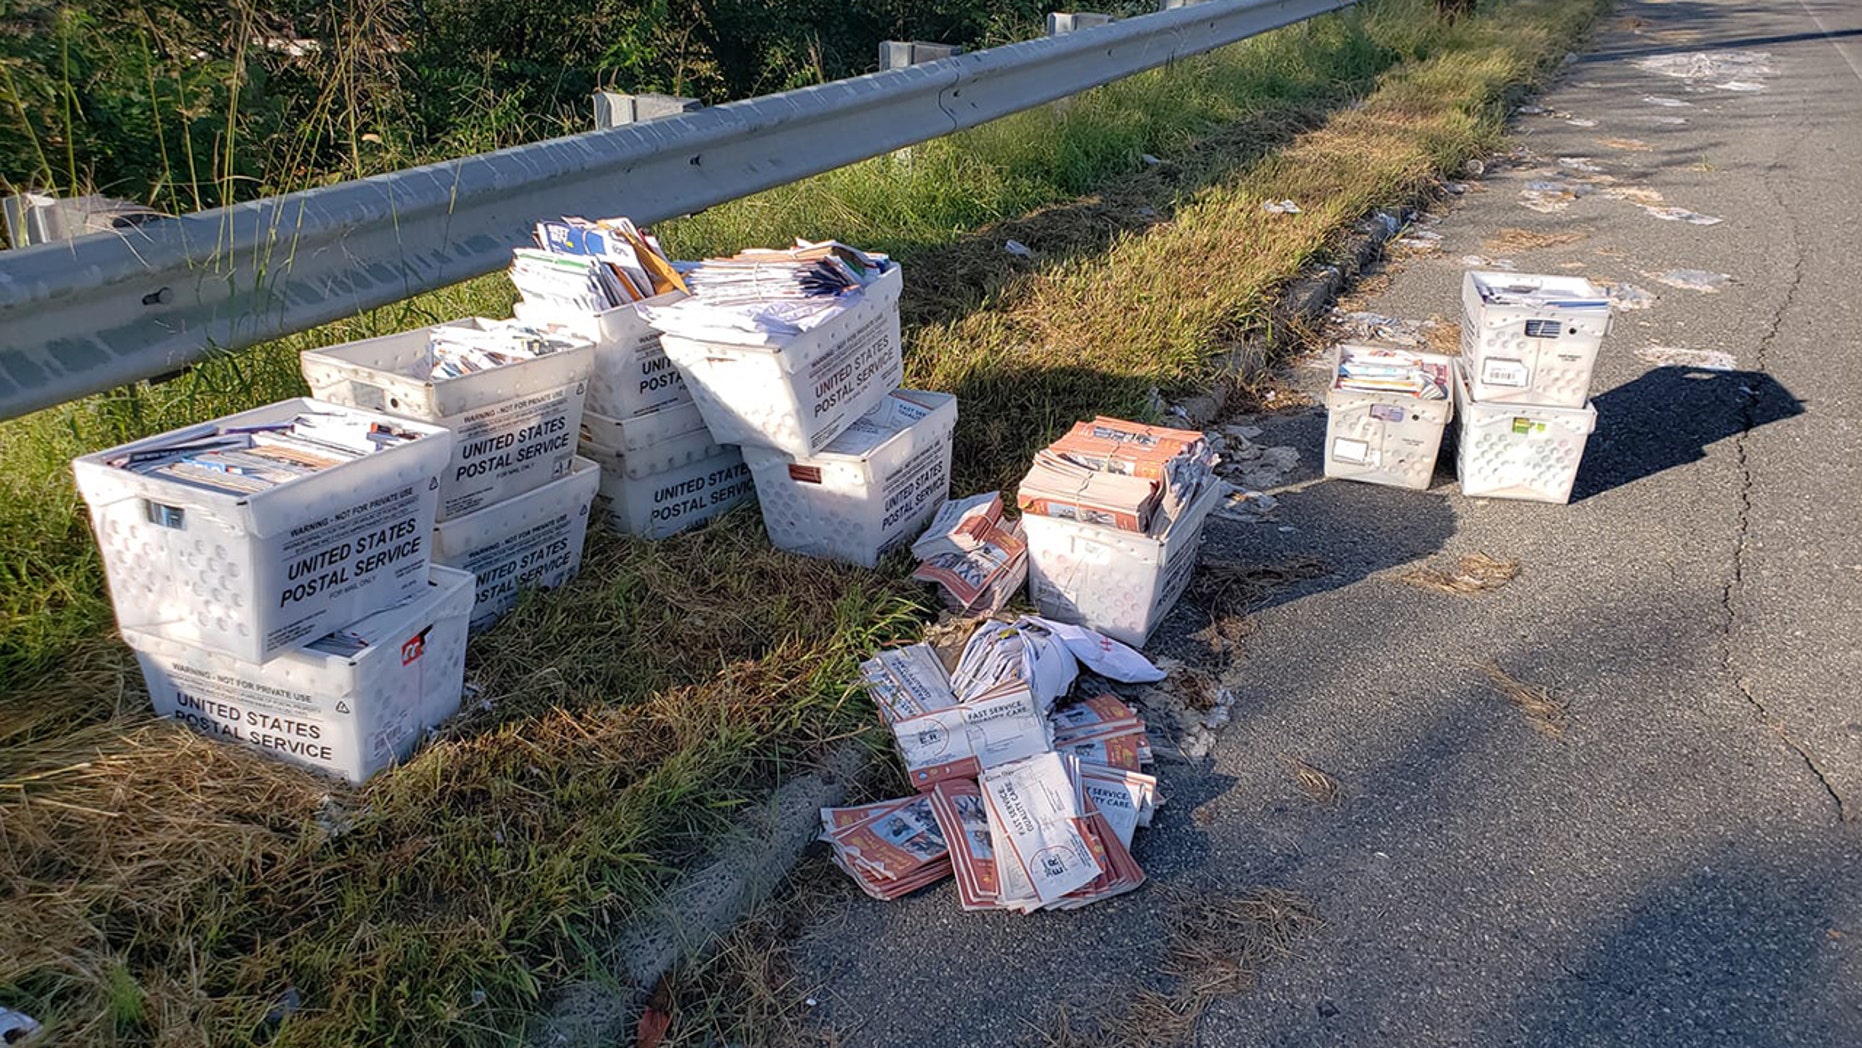 A photo of mail dumped on the side of a road in South New Jersey went viral.